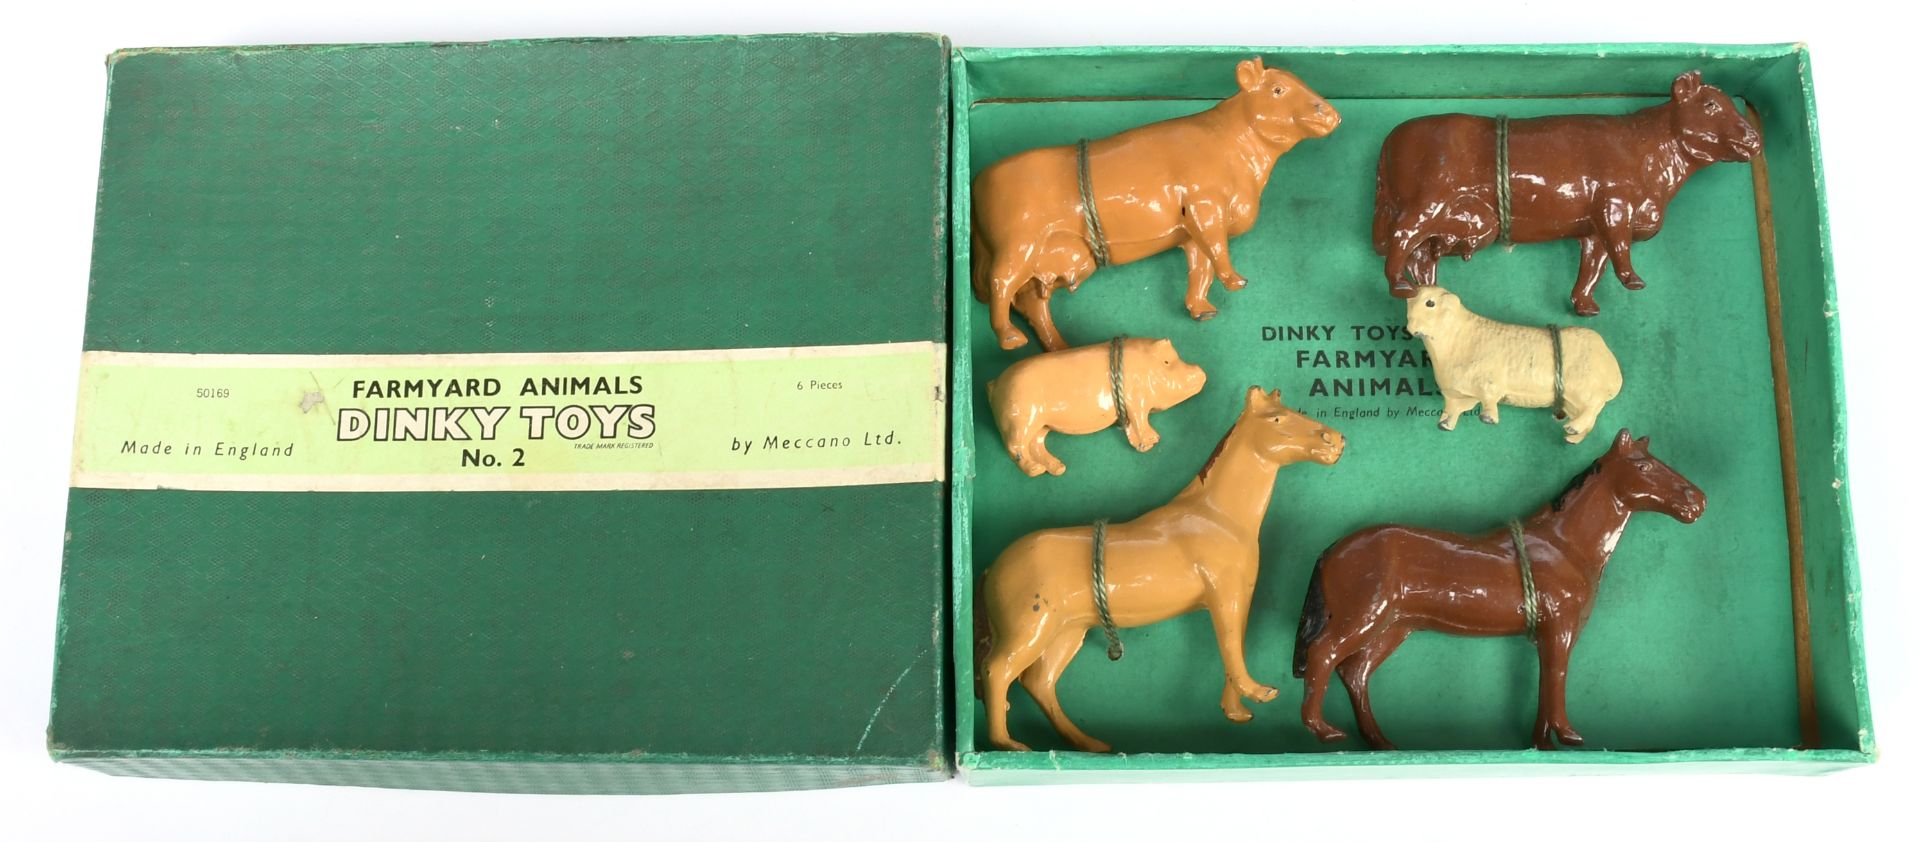 Dinky Toys 2 O Gauge "Farmyard Animals" Figure Set - Containing 6 pieces - including sheep and ho...